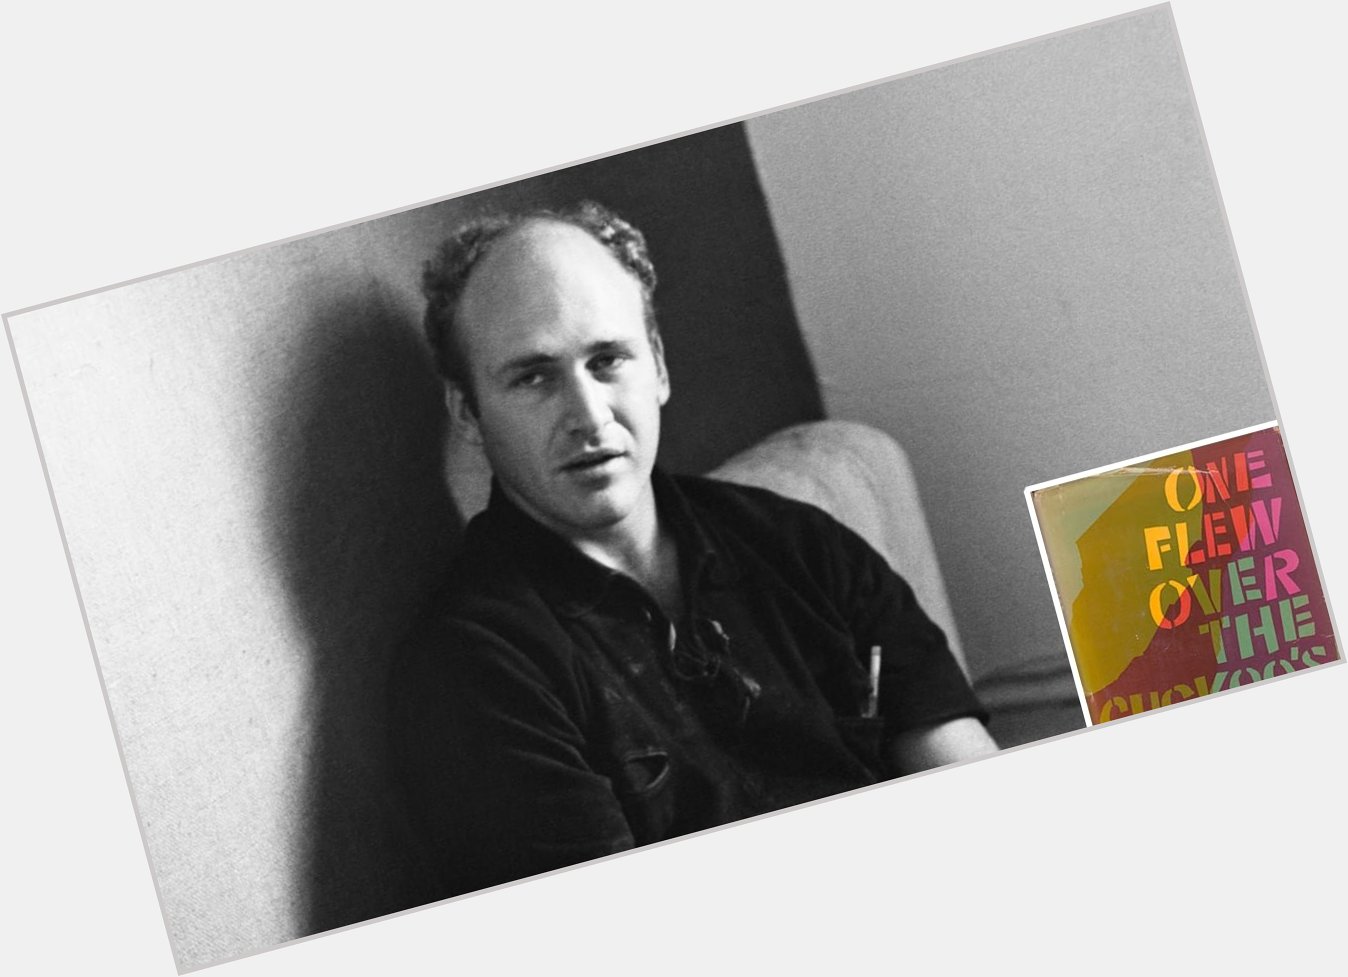 Happy Birthday to ONE FLEW OVER THE CUCKOO\S NEST author Ken Kesey! 